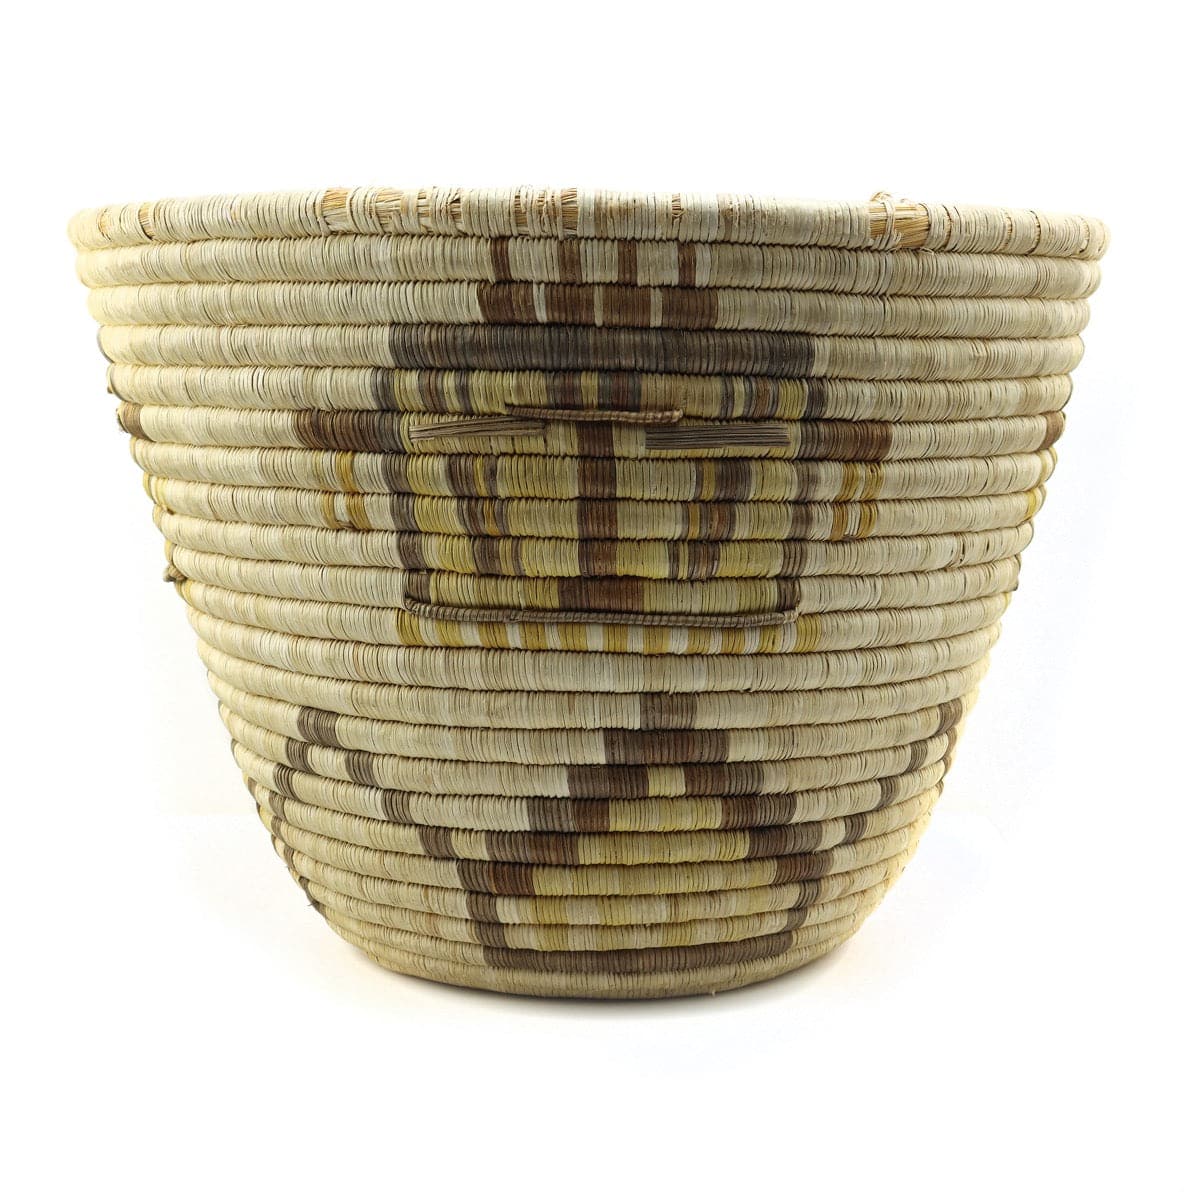 Hopi Polychrome Coiled Basket with Kachina Pictorial c. 1920s, 11" x 15" (SK91855-096-002) 6
